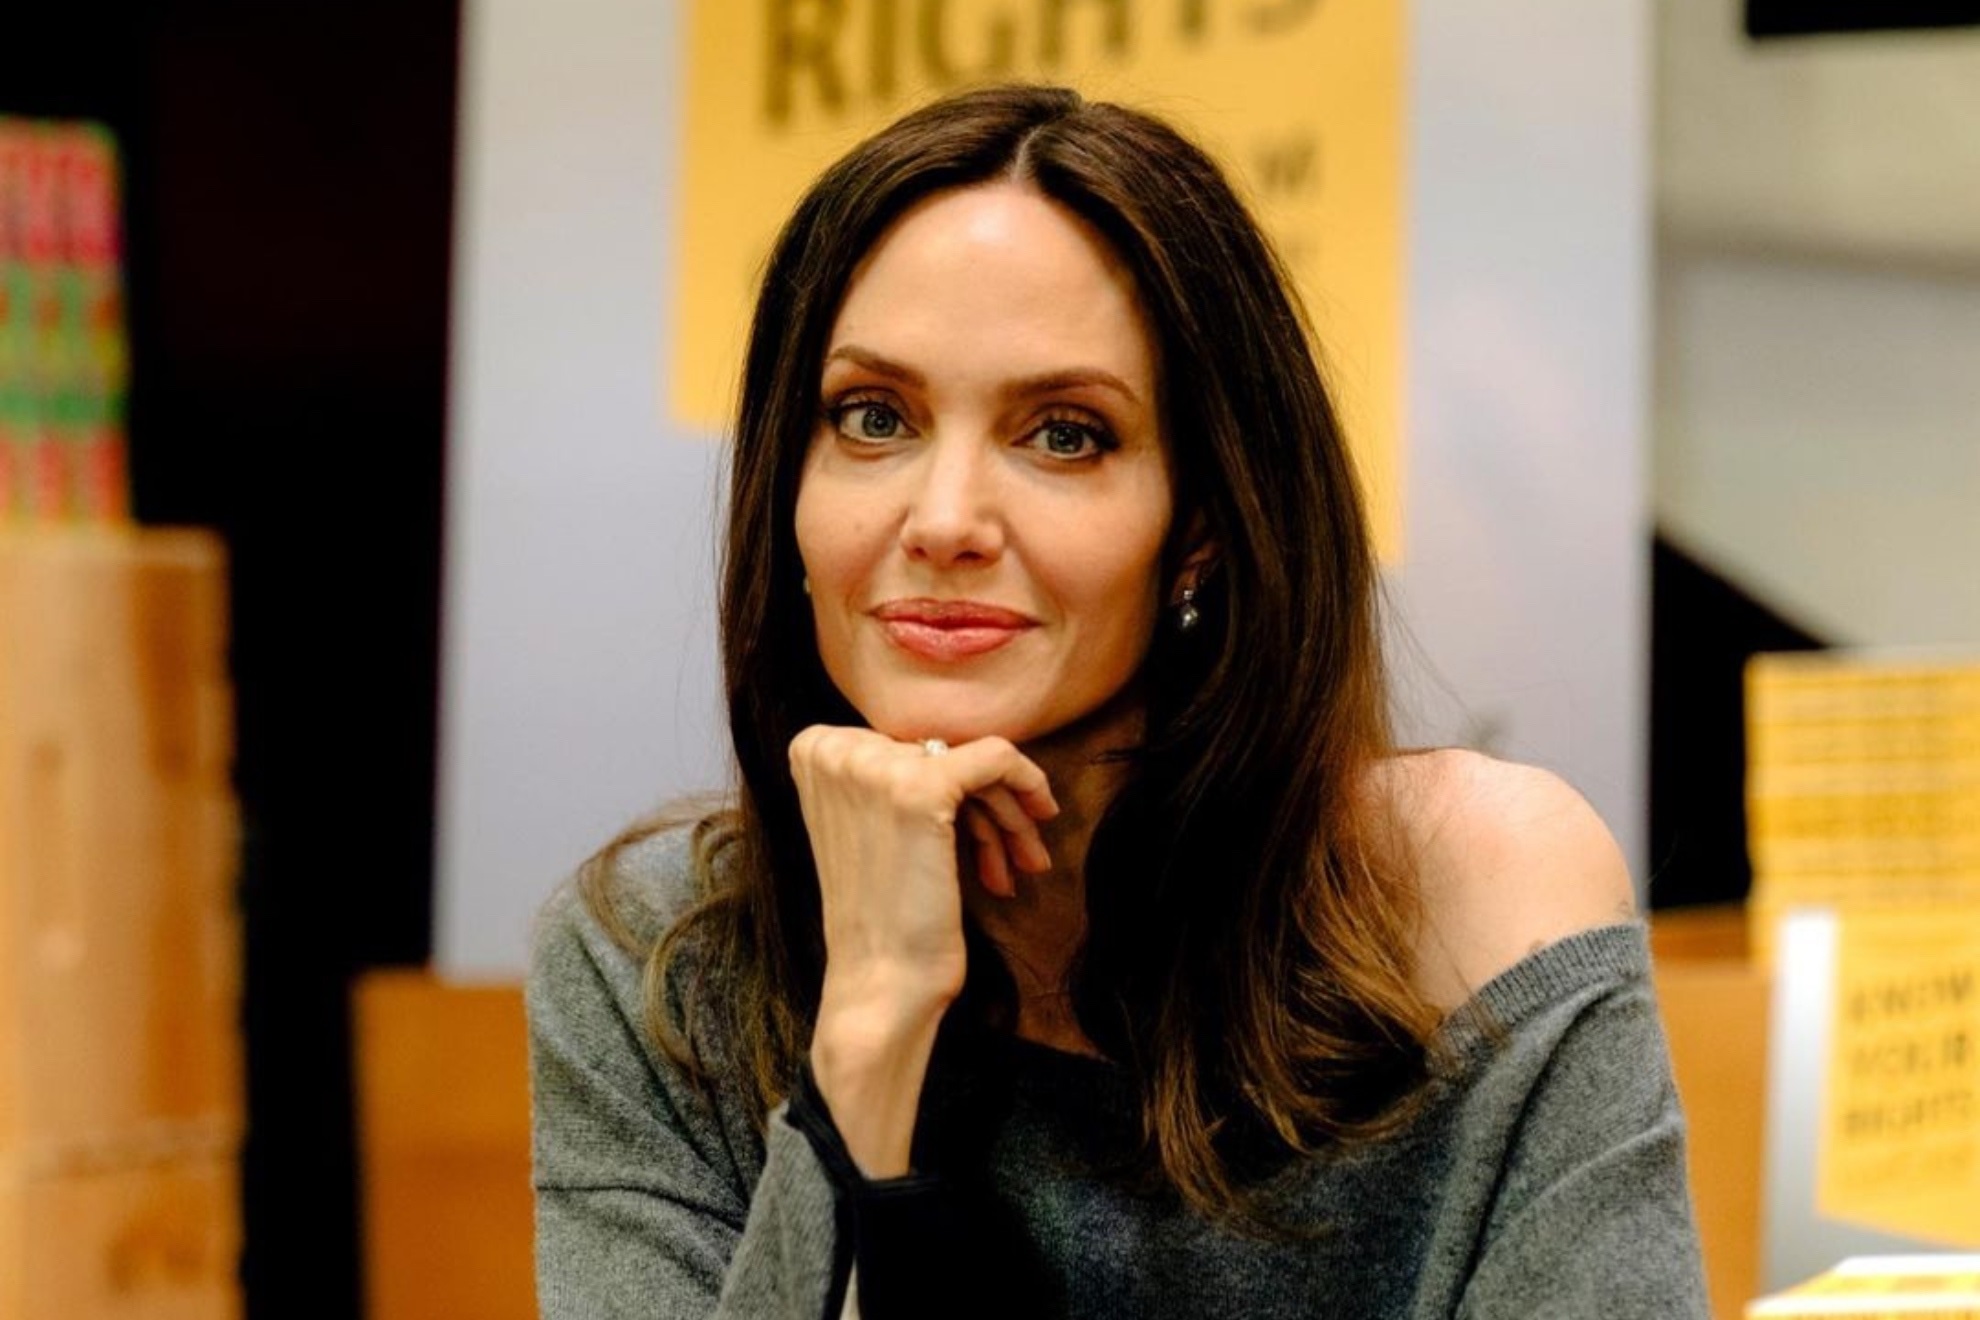 What Angelina Jolie said about her younger dark self